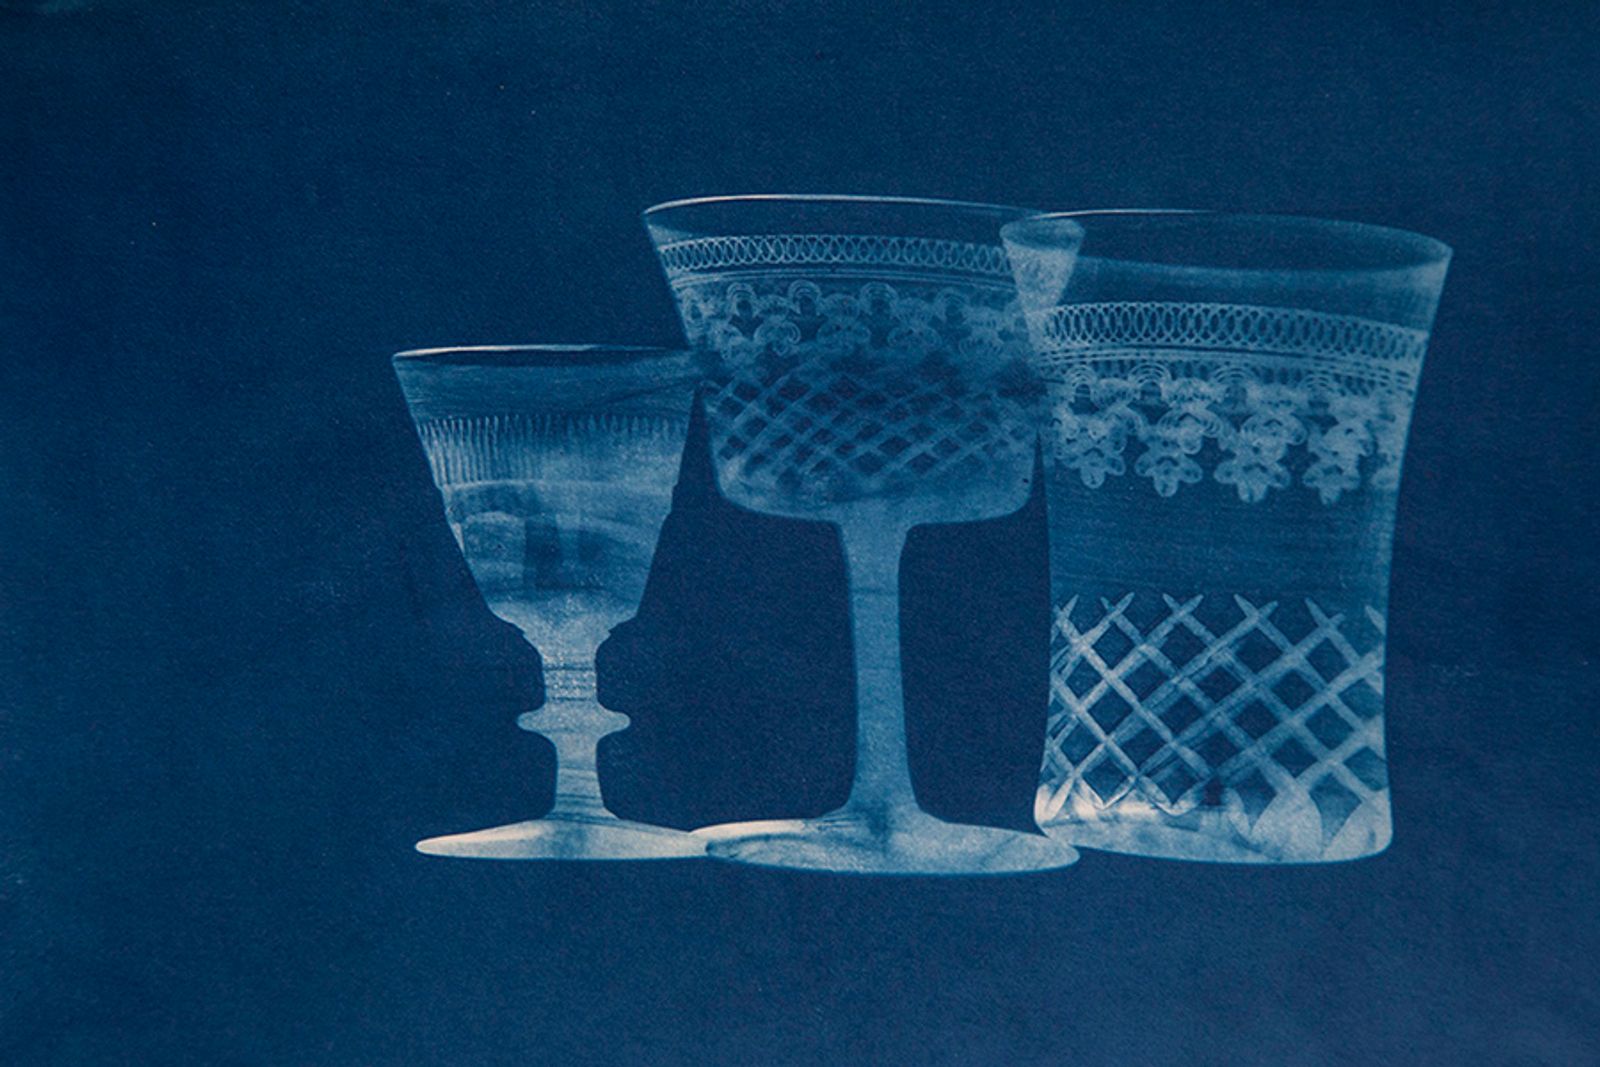 © Heather McDonough - Image from the Surface Tension (In Blue & White) photography project